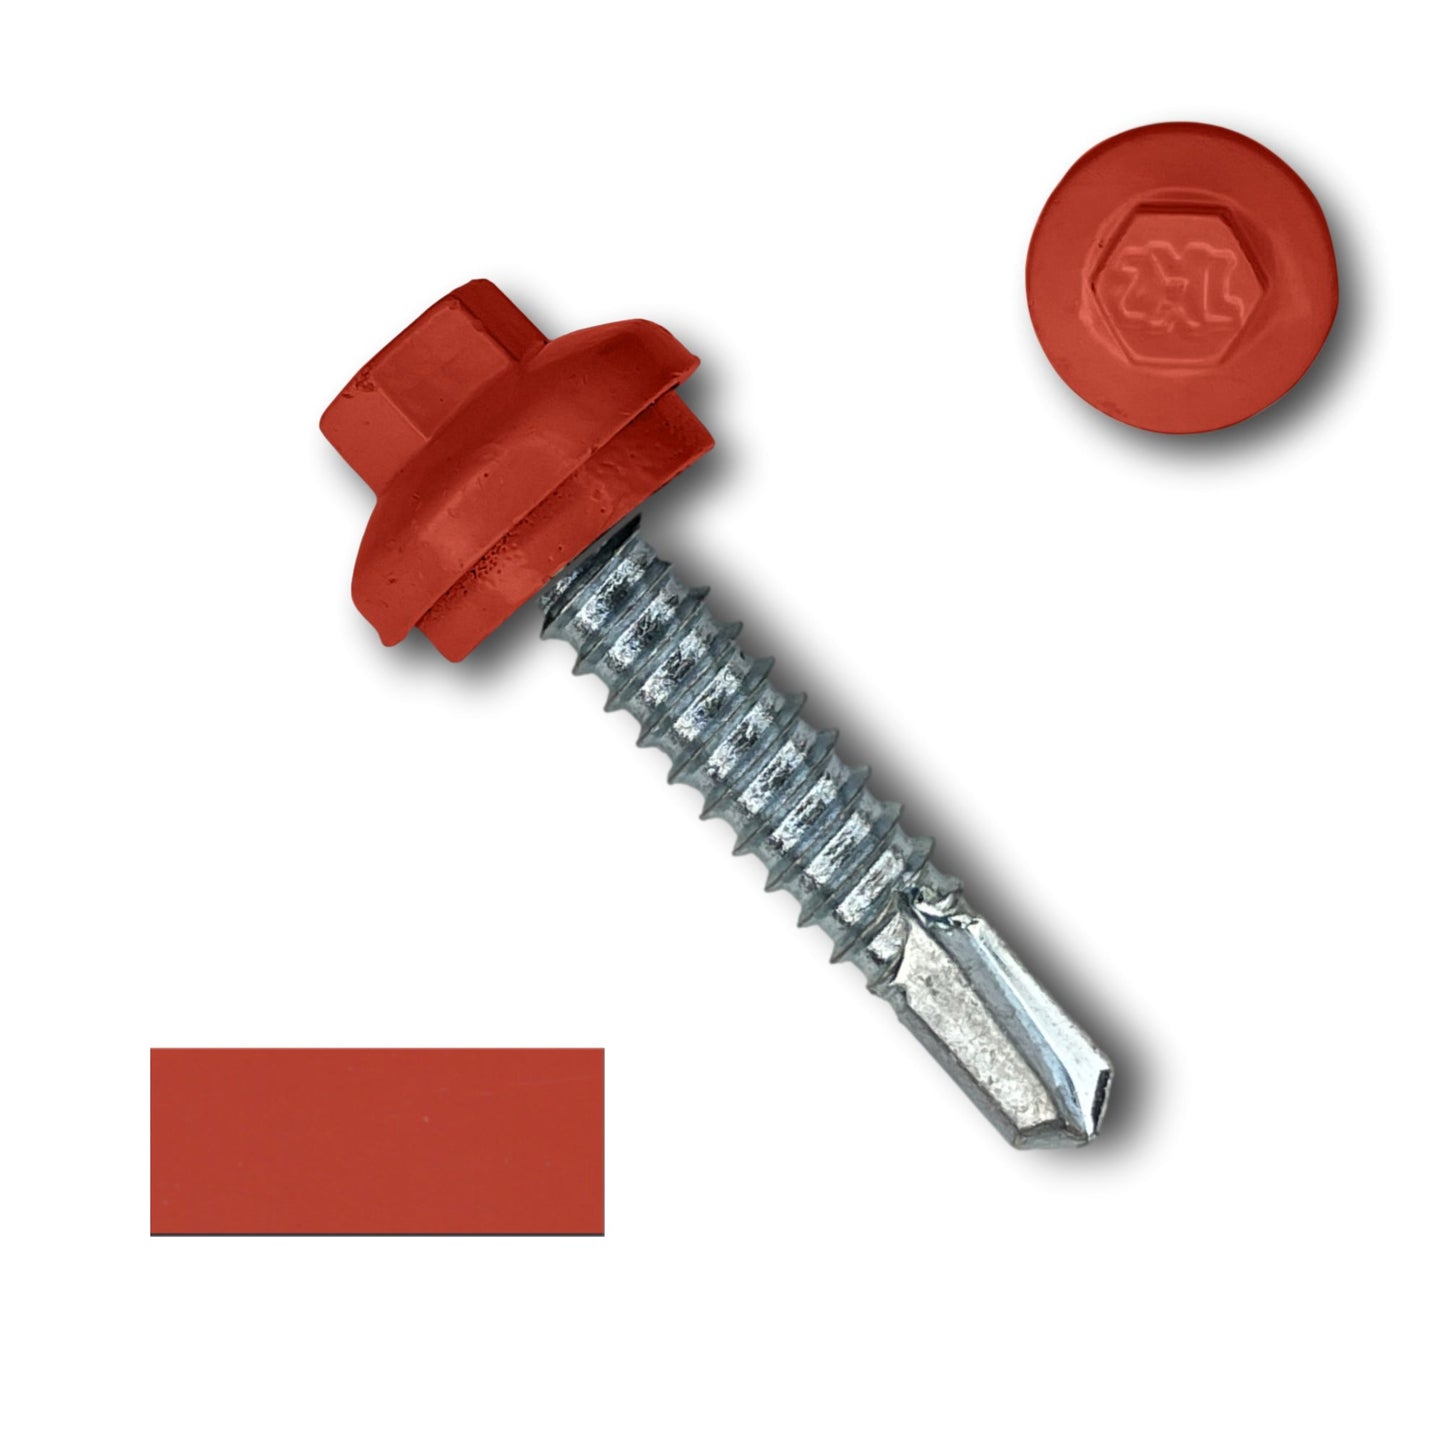 A close-up image of a red hexagon head self-drilling roofing screw with a rubber washer. The screw is shown from a side angle, revealing its sharp drill point. A Perma Cover #14 x 1.25" ZXL Dome Cap Metal Building Screws (Metal-to-Metal), Self-Drilling - 250, 500, or 1000 Pack and a red rectangular color sample are also displayed against a white background.